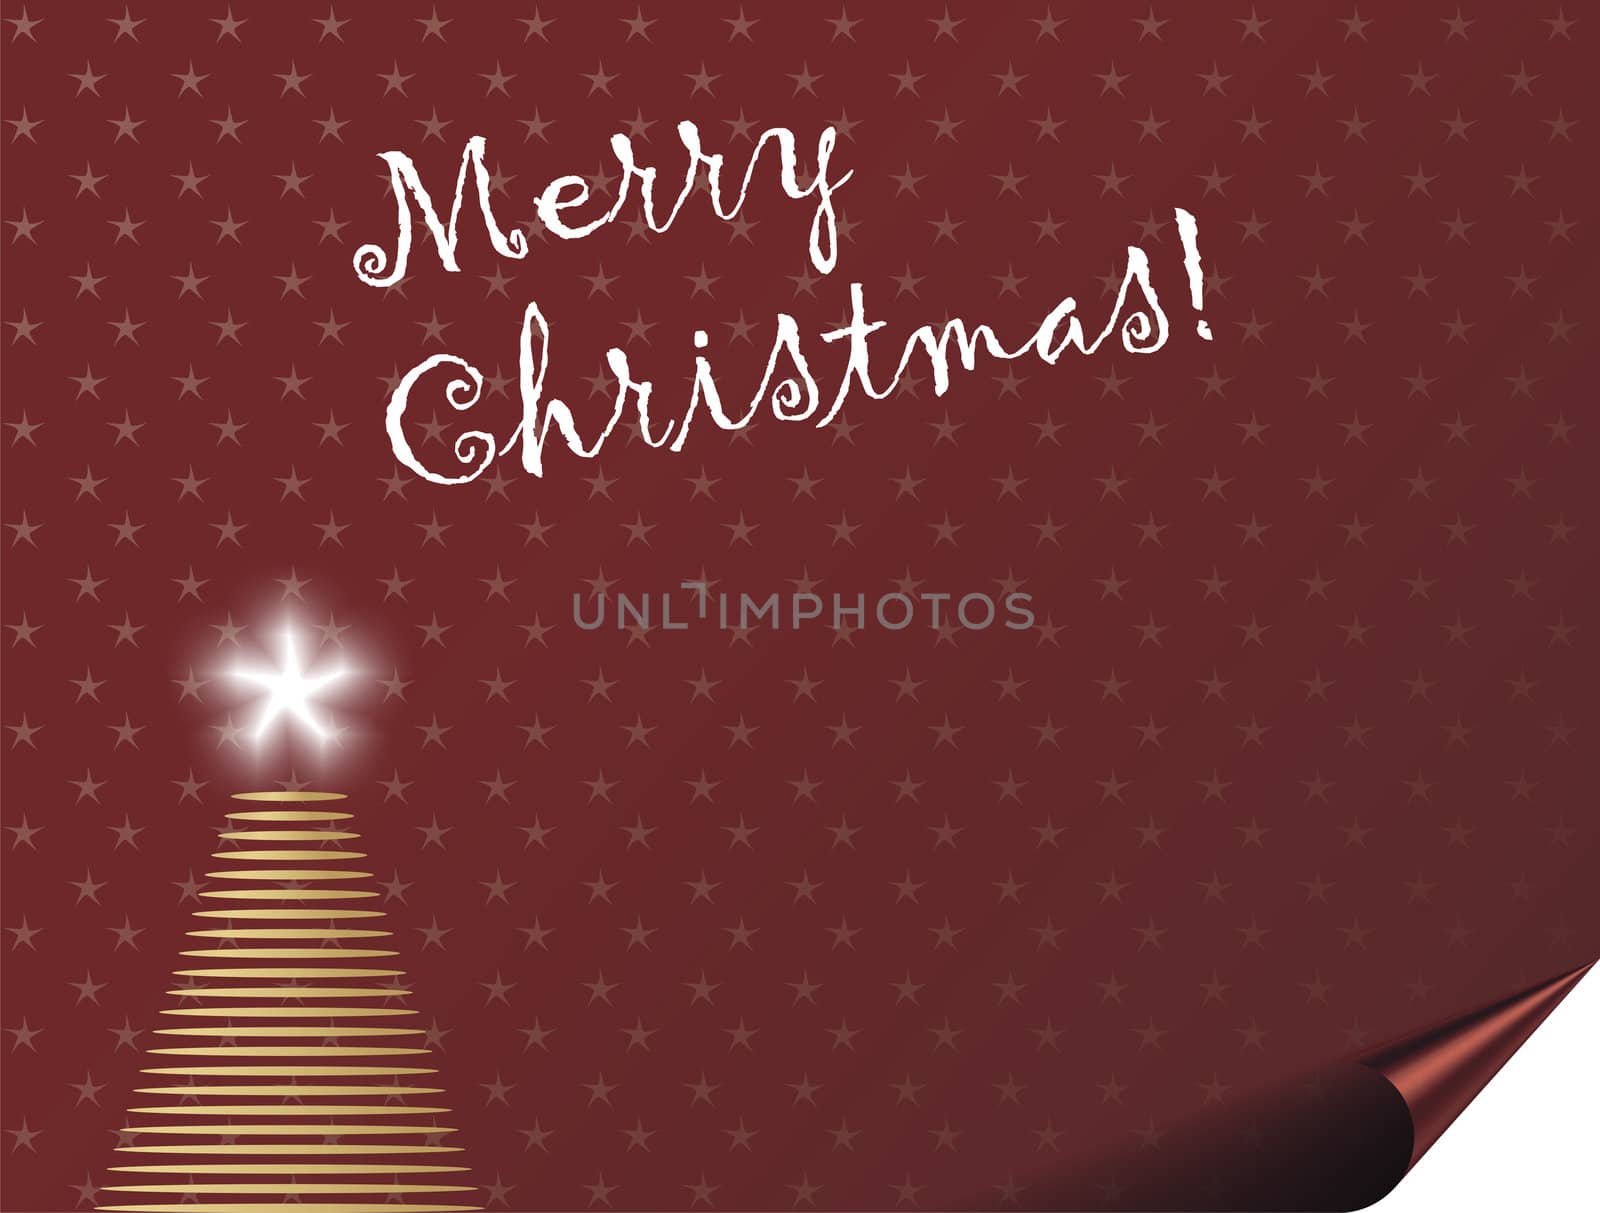 Christmas card background with tree and stars - space for text.